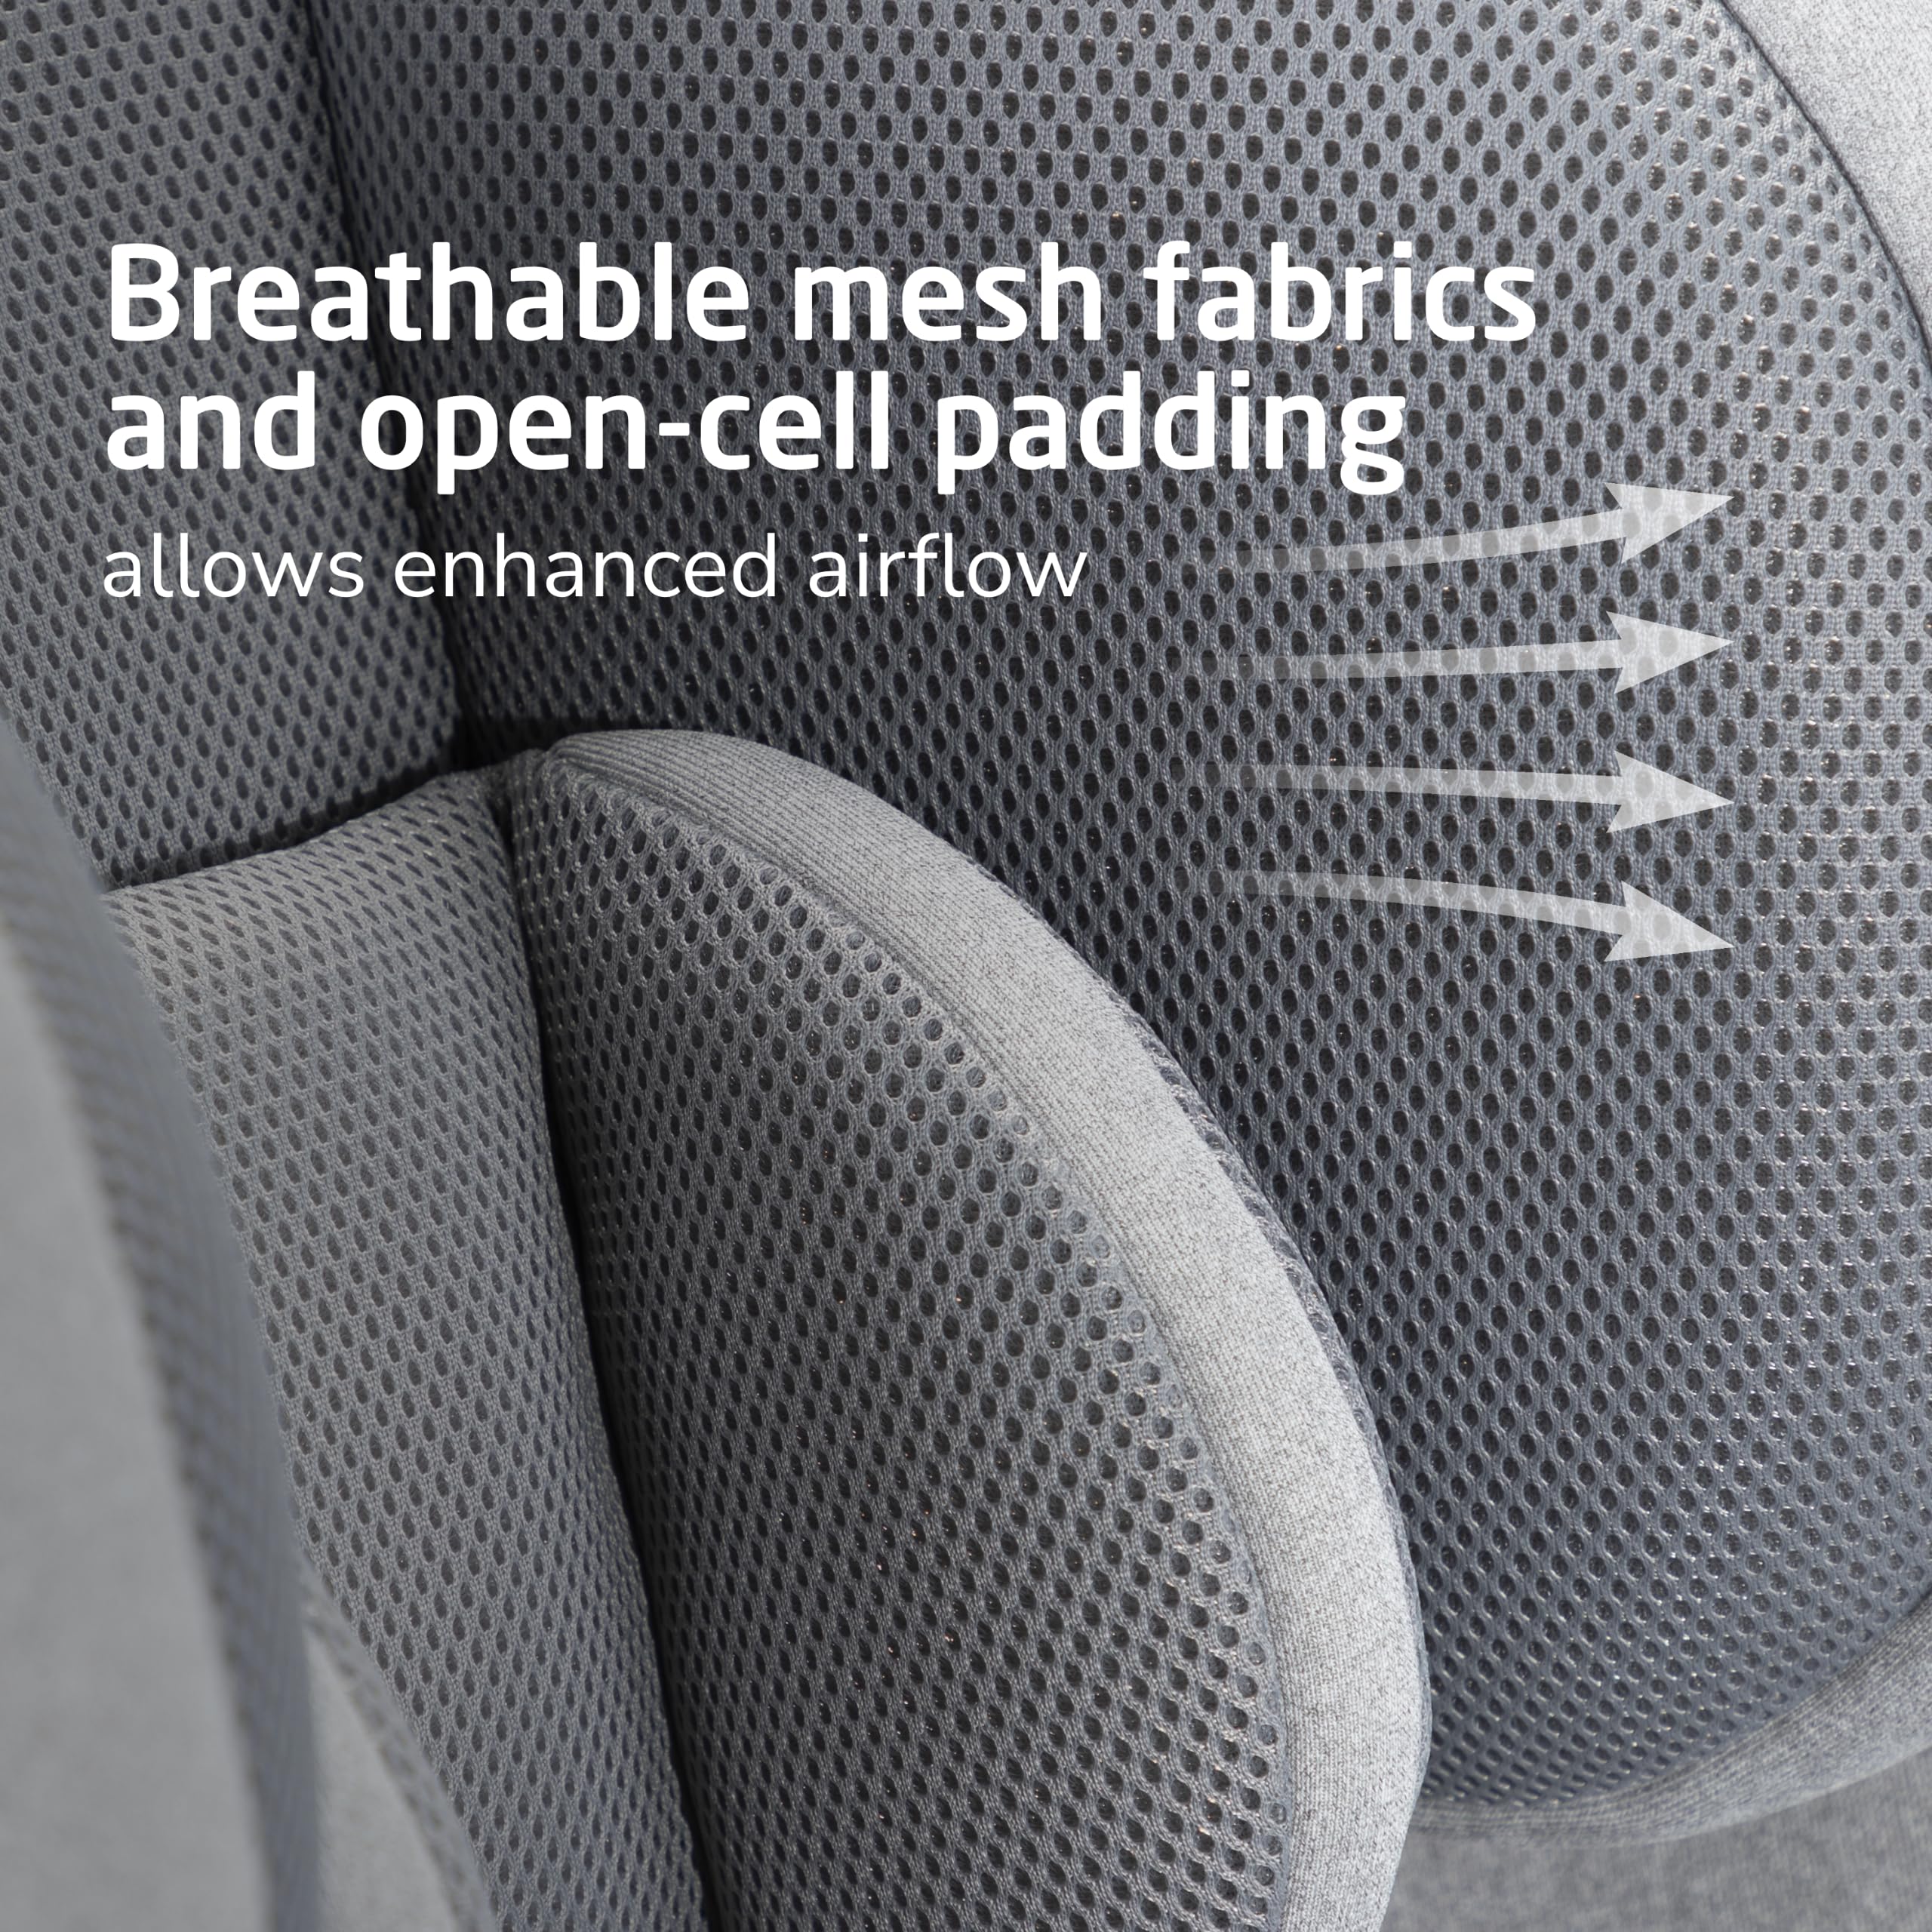 Maxi-Cosi Pria™ Chill All-in-One Convertible Car Seat with VentMax Fan System to Help Keep Baby Cool, Chill